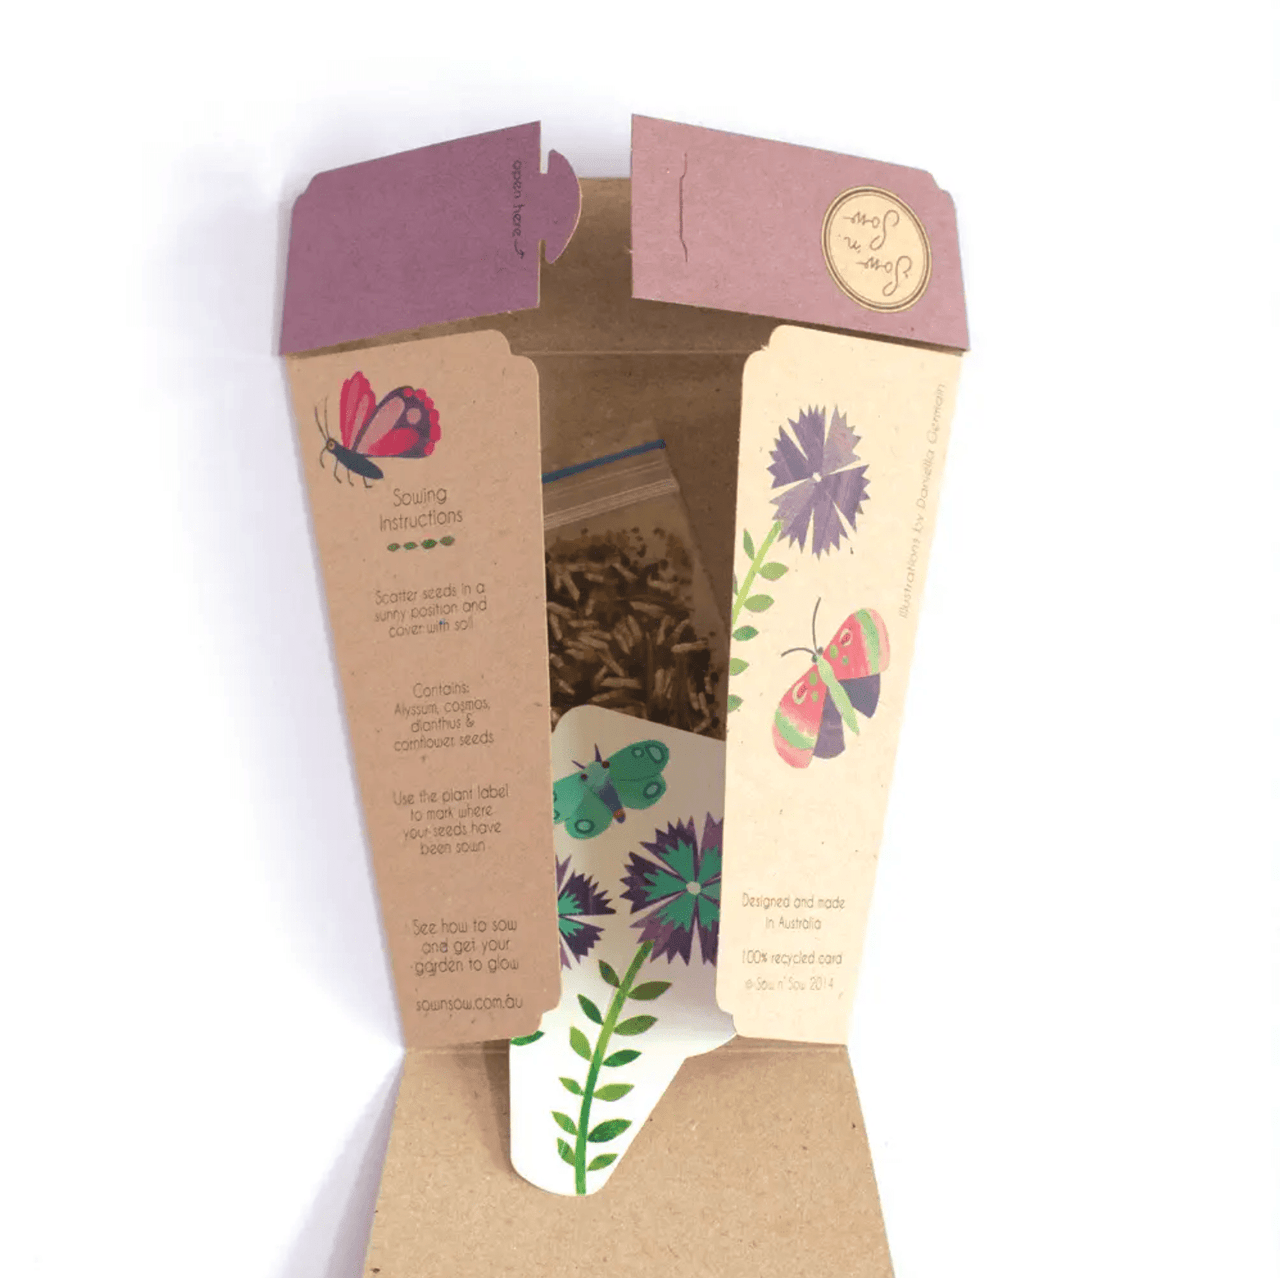 A box of Seeds - Enchanted Garden from Sow n Sow with a flower and butterflies on it.